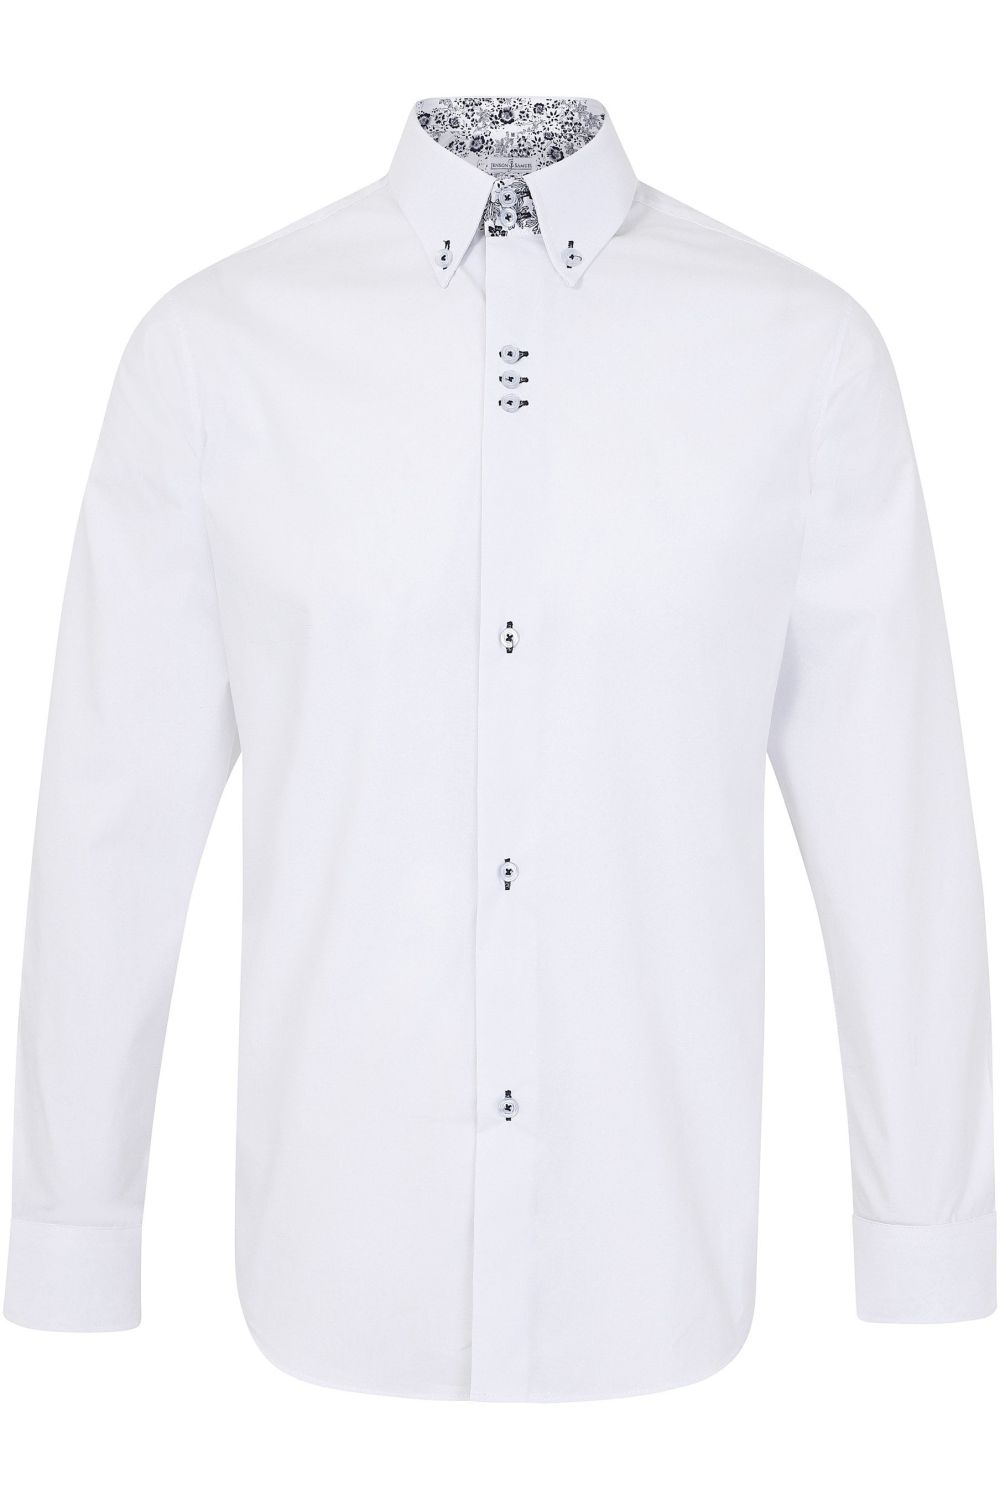  White Regular Fit 100% Cotton Shirt with Navy Button Down Collar